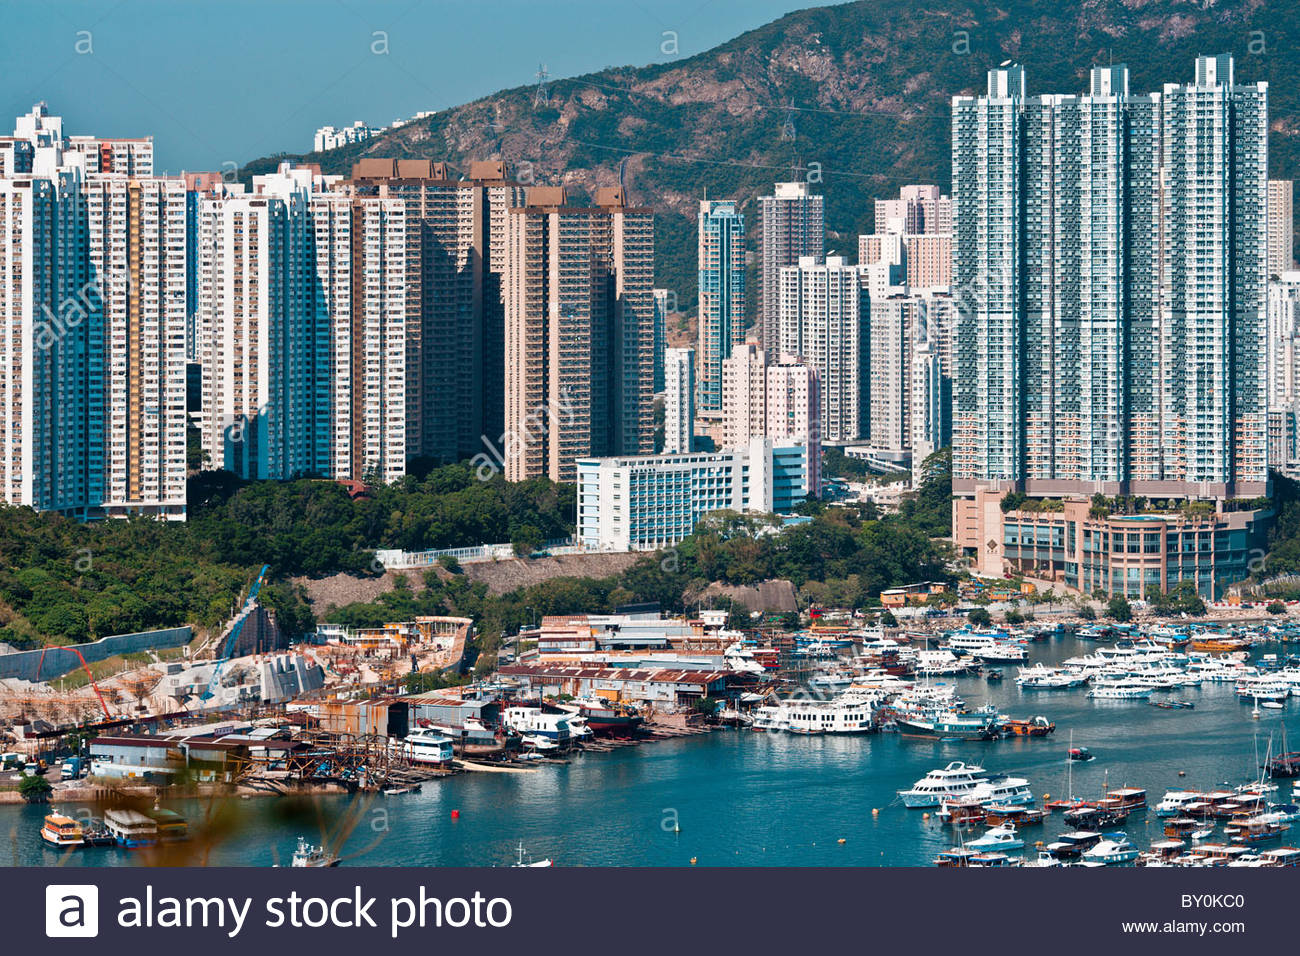 The south side of Hong Kong Island in the Aberdeen Area, Hong Kong Stock Photo: 33821312 - Alamy